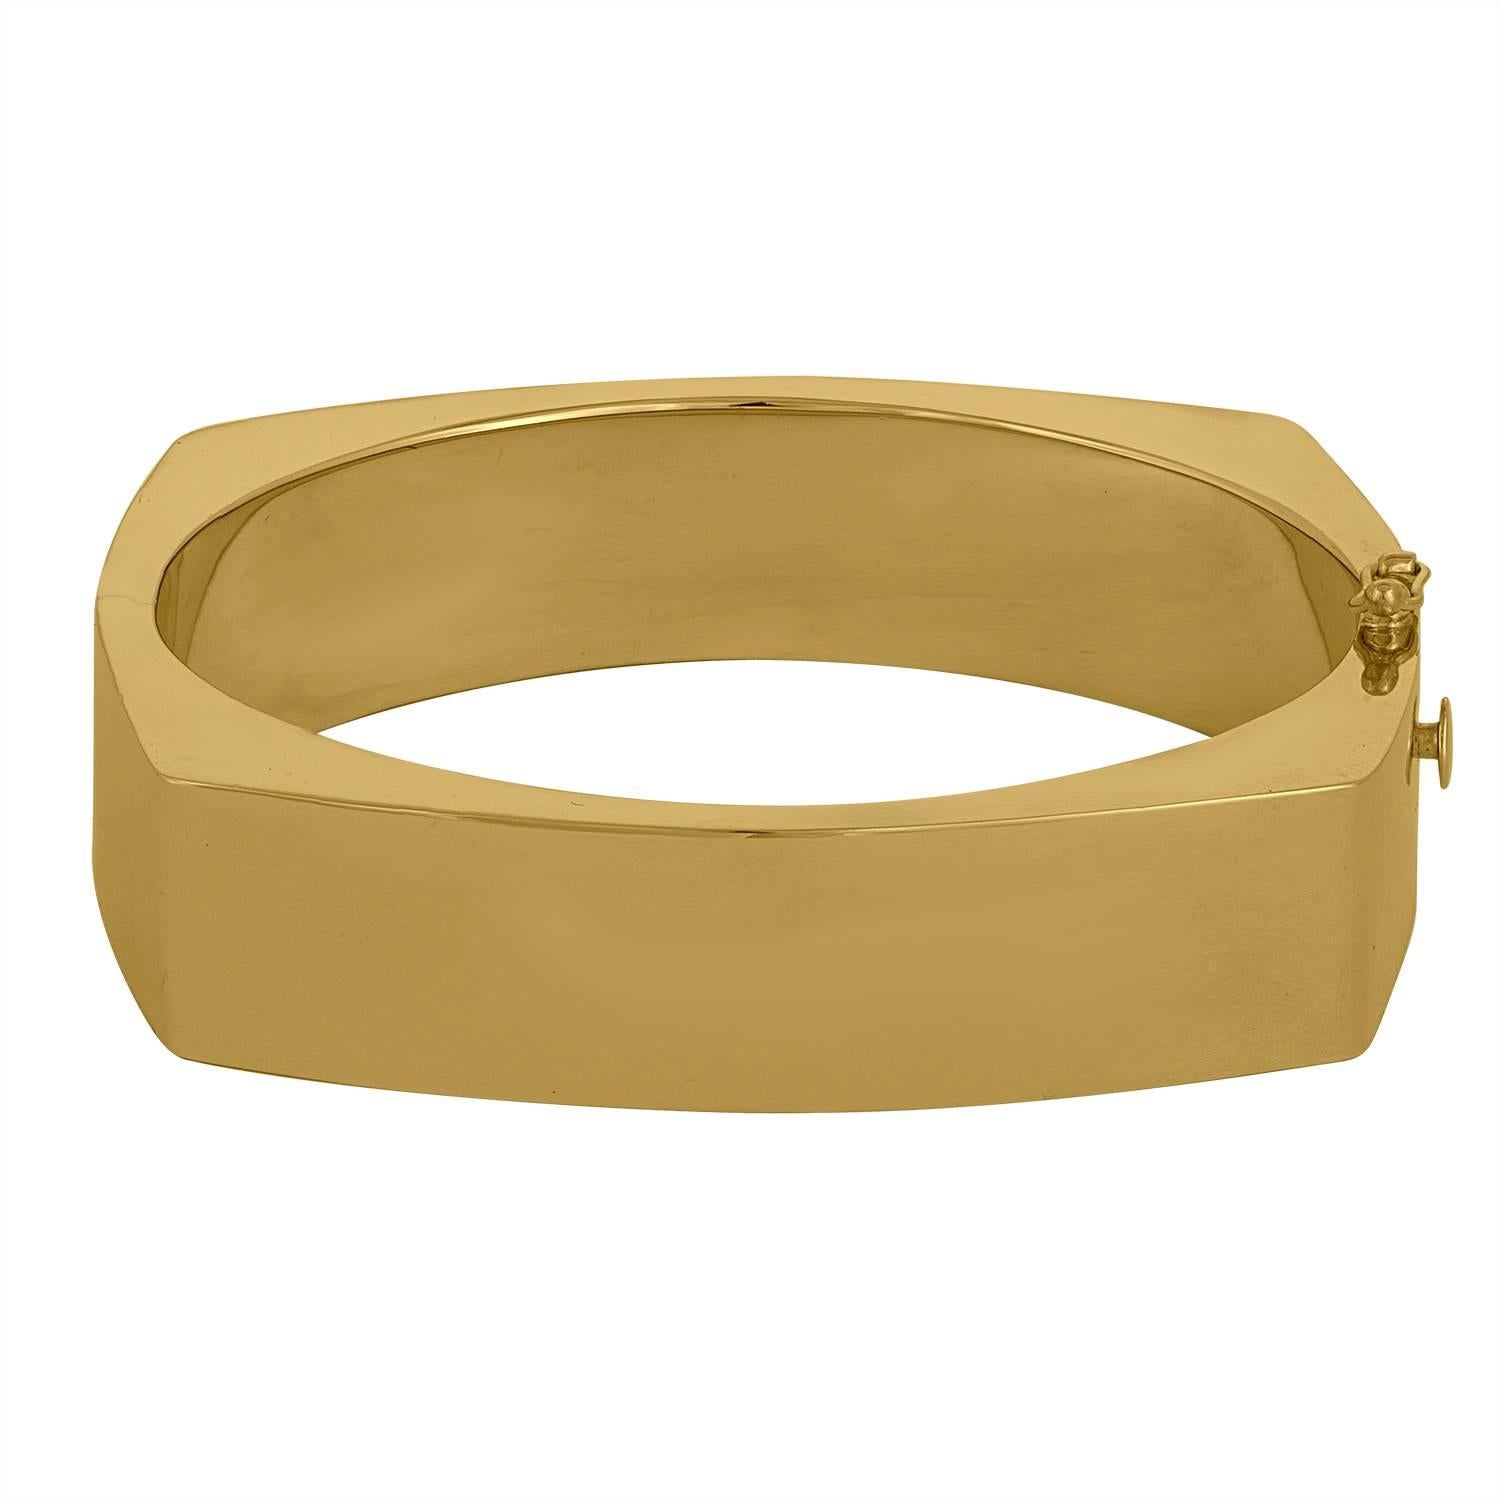 30.73 Grams of 14K Yellow Gold Square looking Bangle. 
This Rectangular Bangle has the 70'-80' Look. 
This Approximate 1.5 Centimeter wide Bangle  has an opening from the side with Double Lock to it for Safety.
